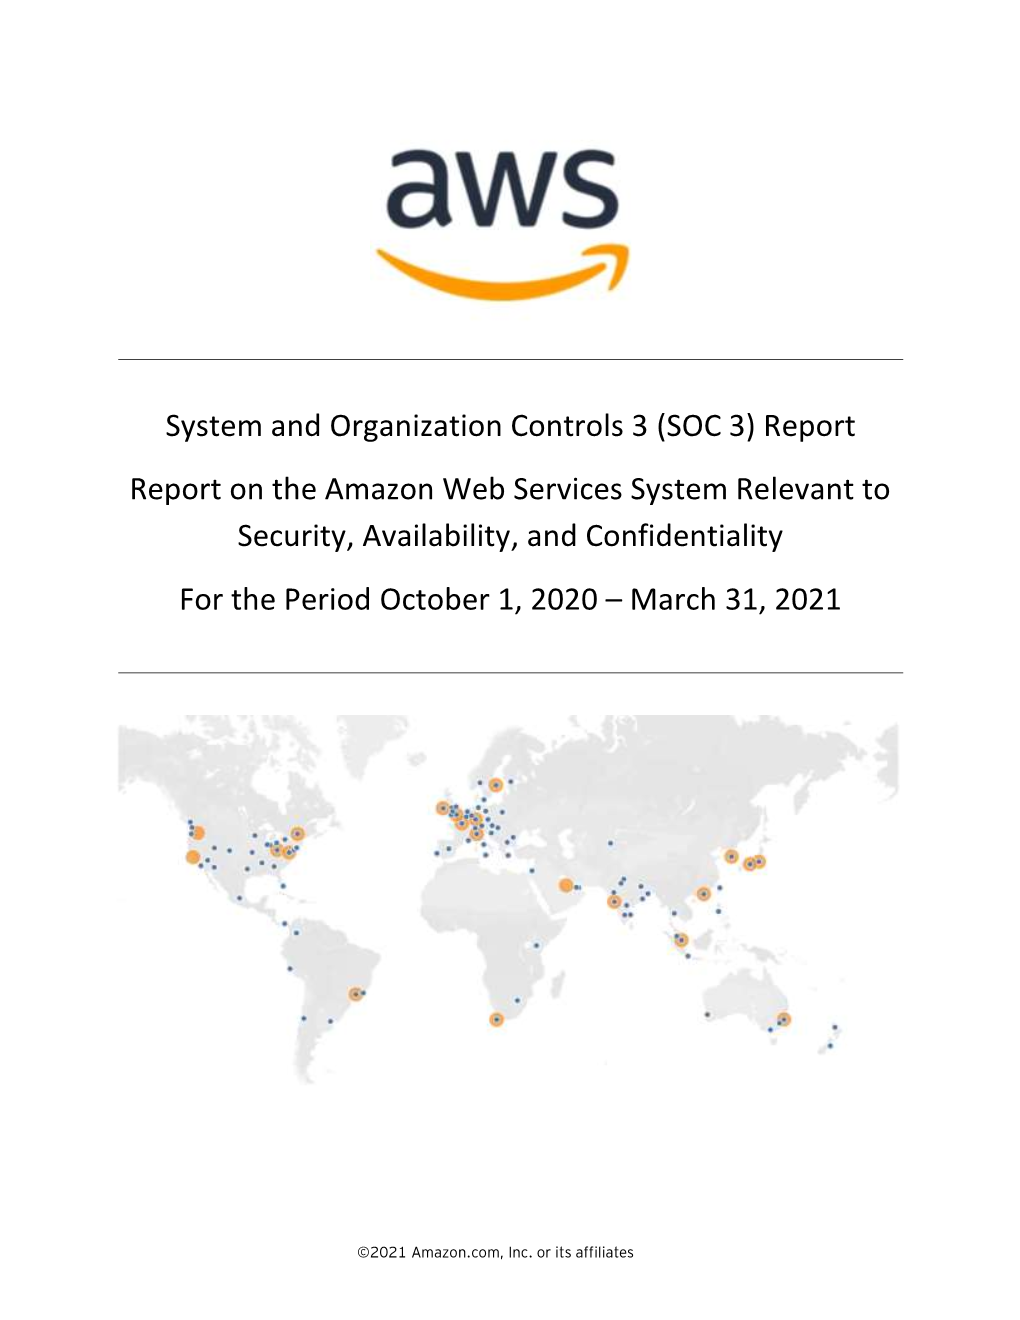 System and Organization Controls 3 (SOC 3) Report